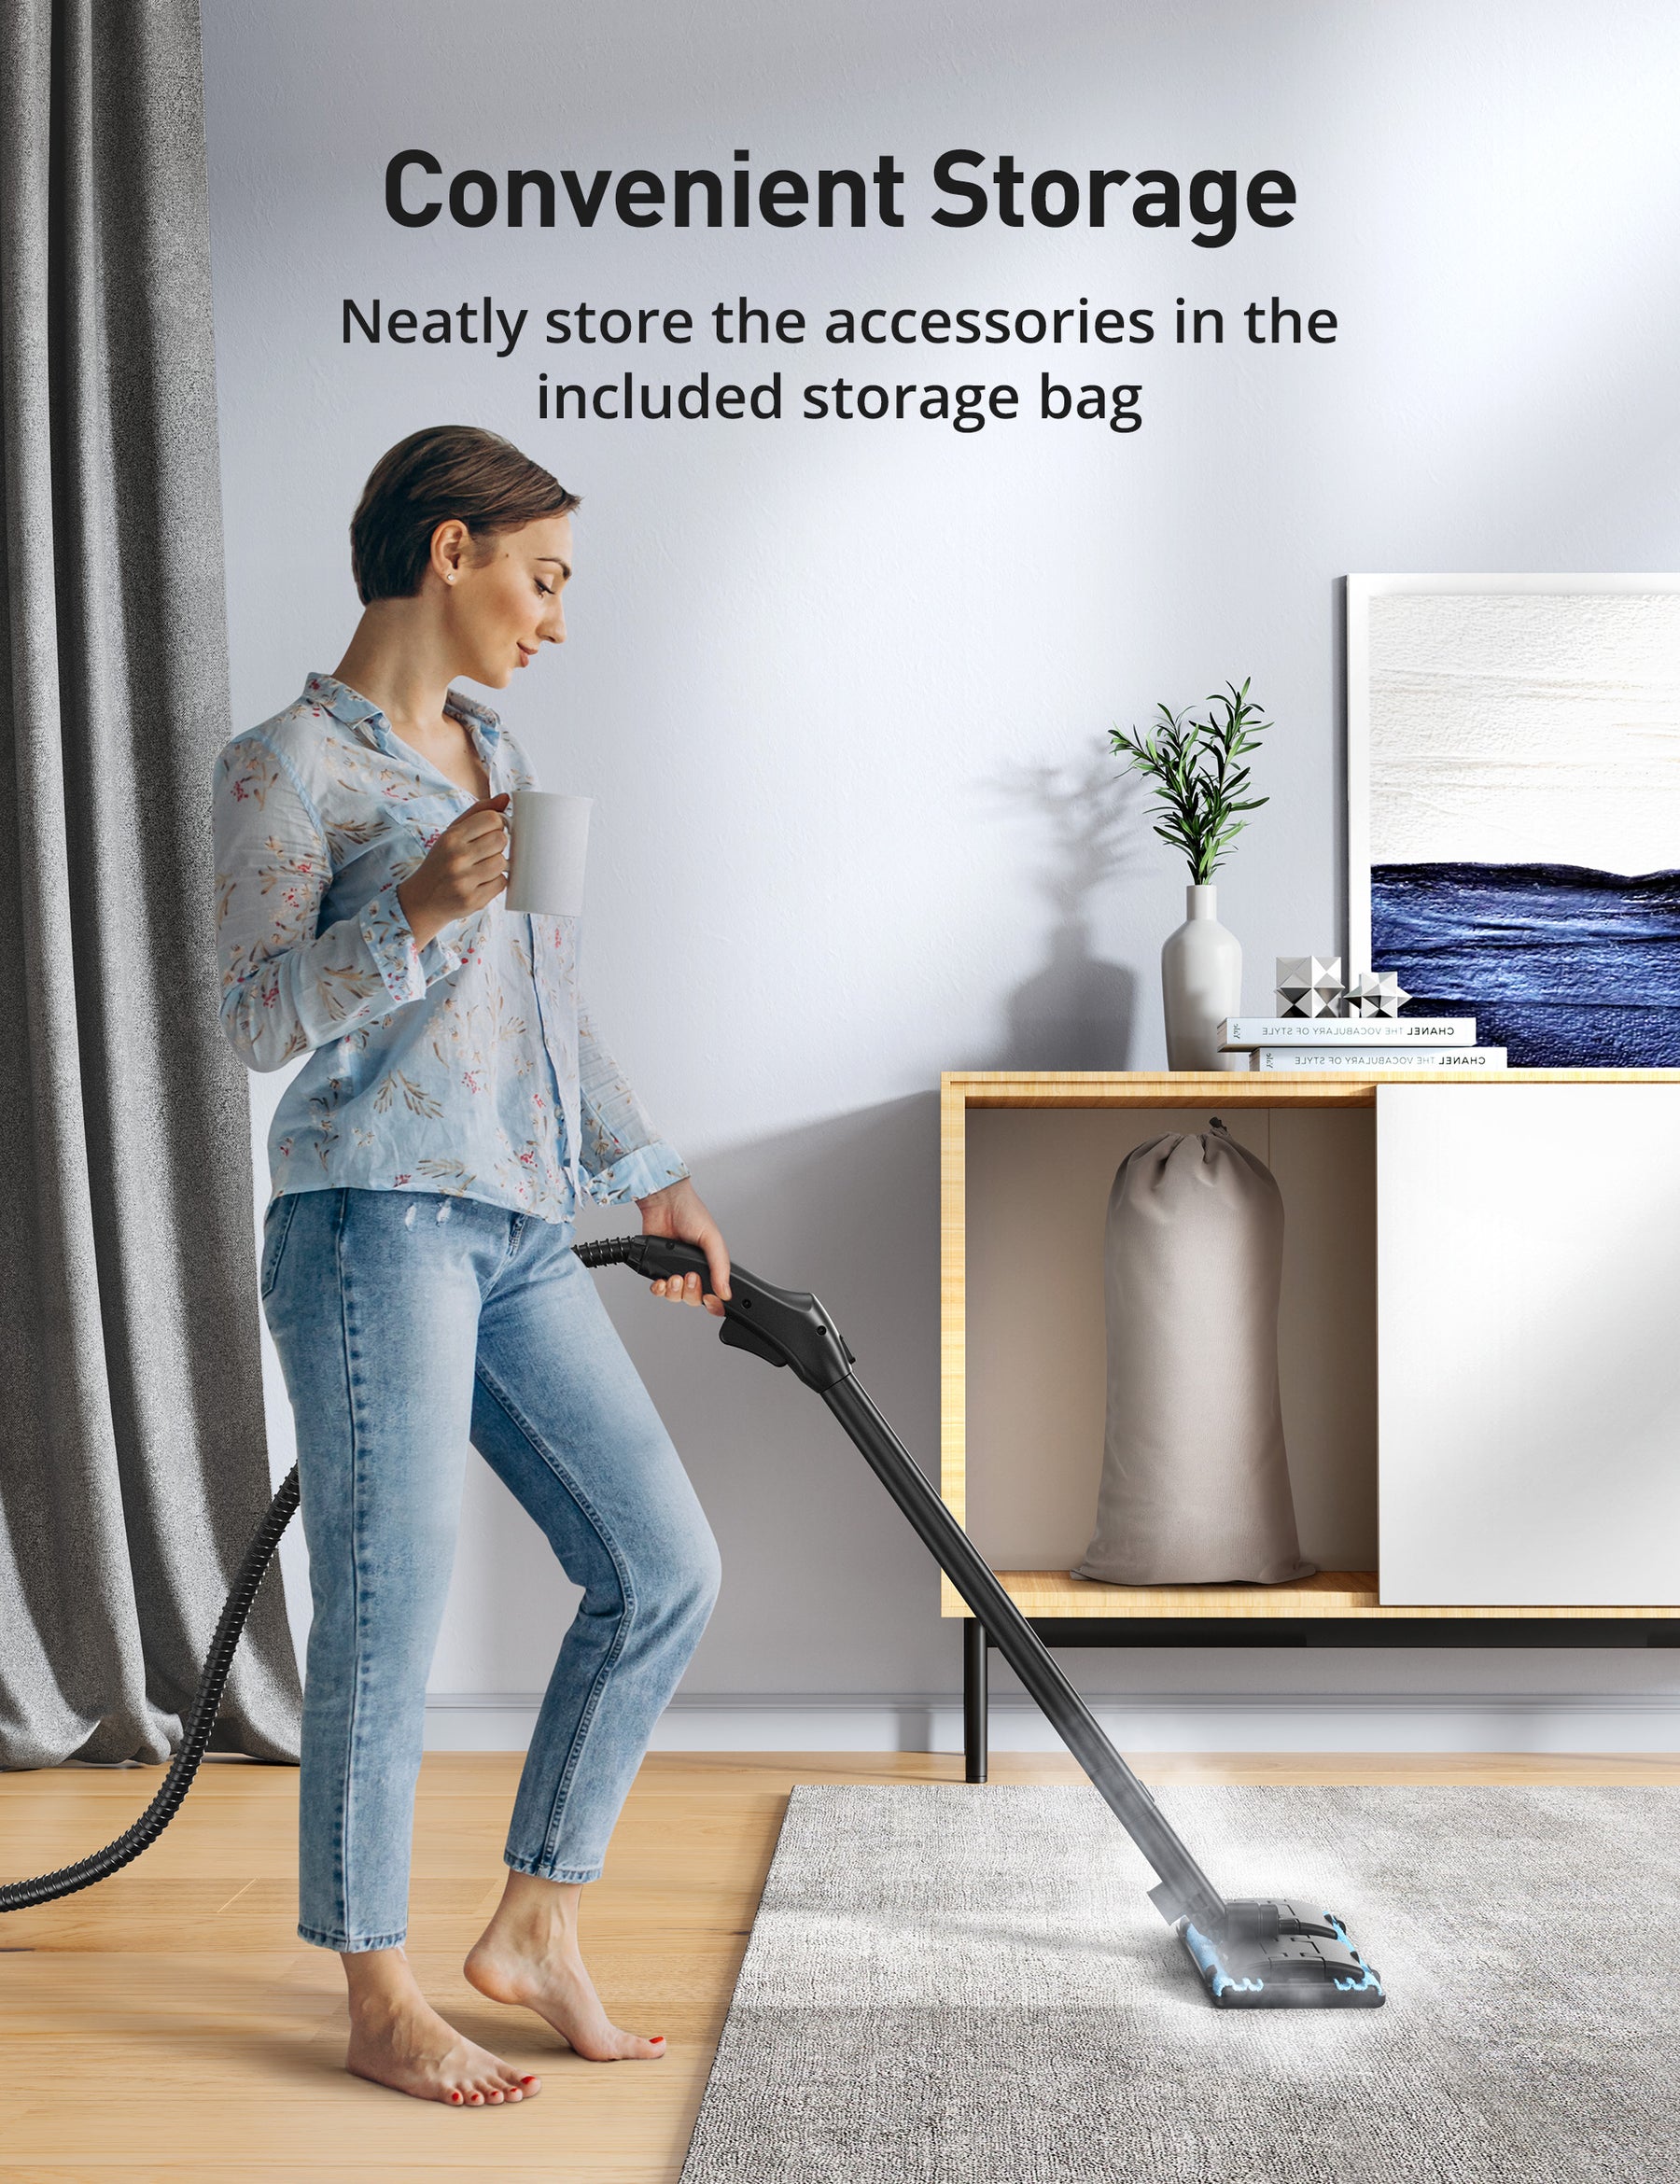 best canister steam cleaner